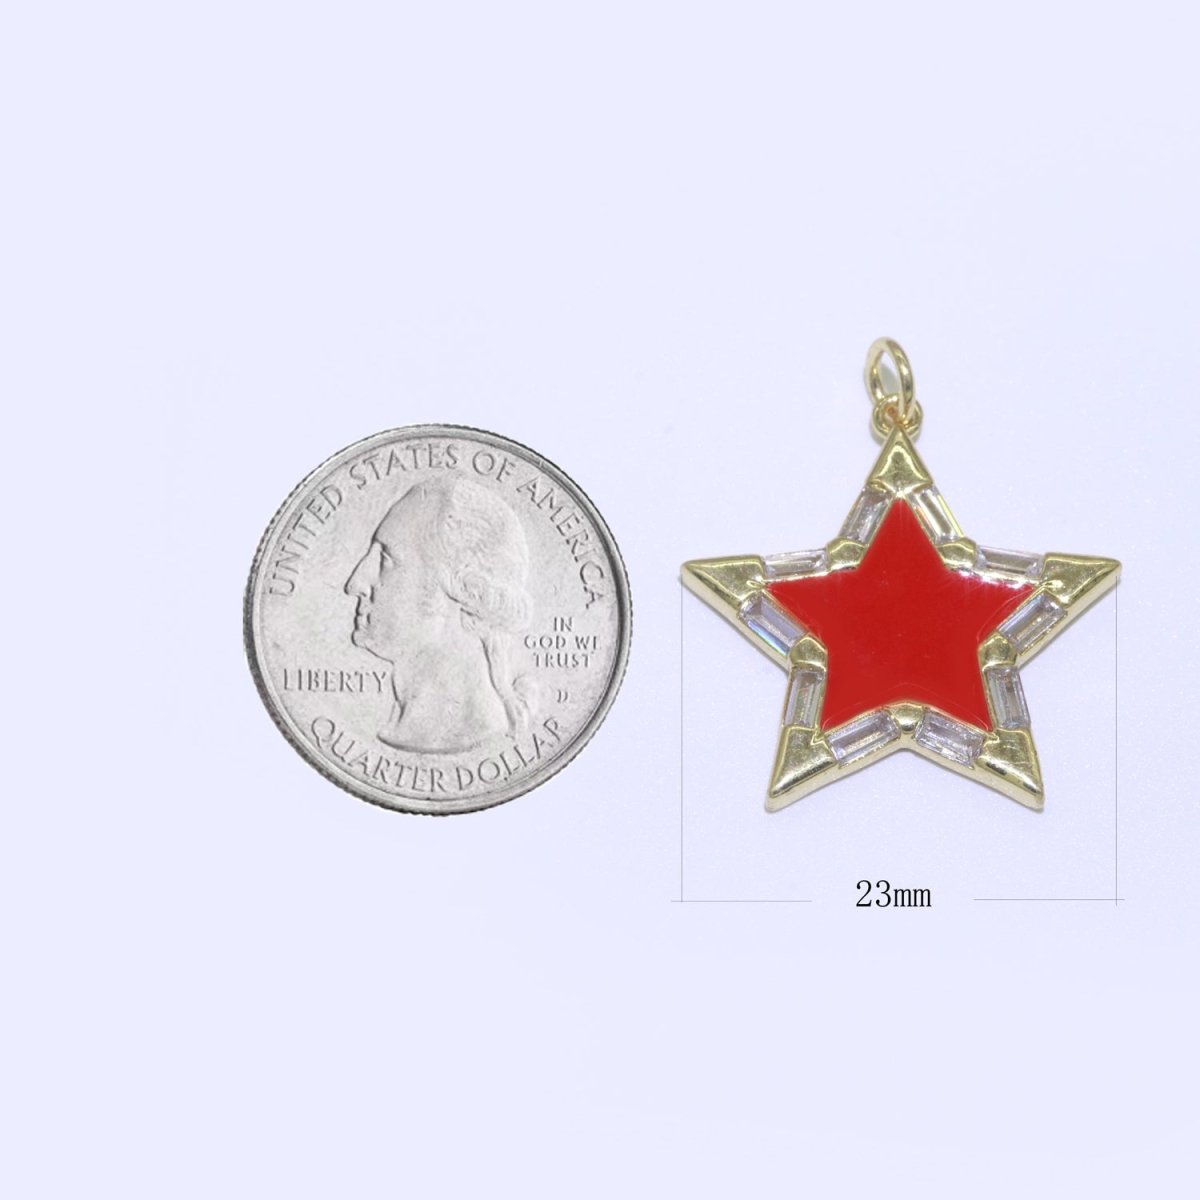 Colorful Enamel Star Charm Pendant, Red Yellow Pink Green Blue Enamel Cubic Pendant, 14K gold Filled Celestial Jewelry Making Supply M-325-M-335 - DLUXCA